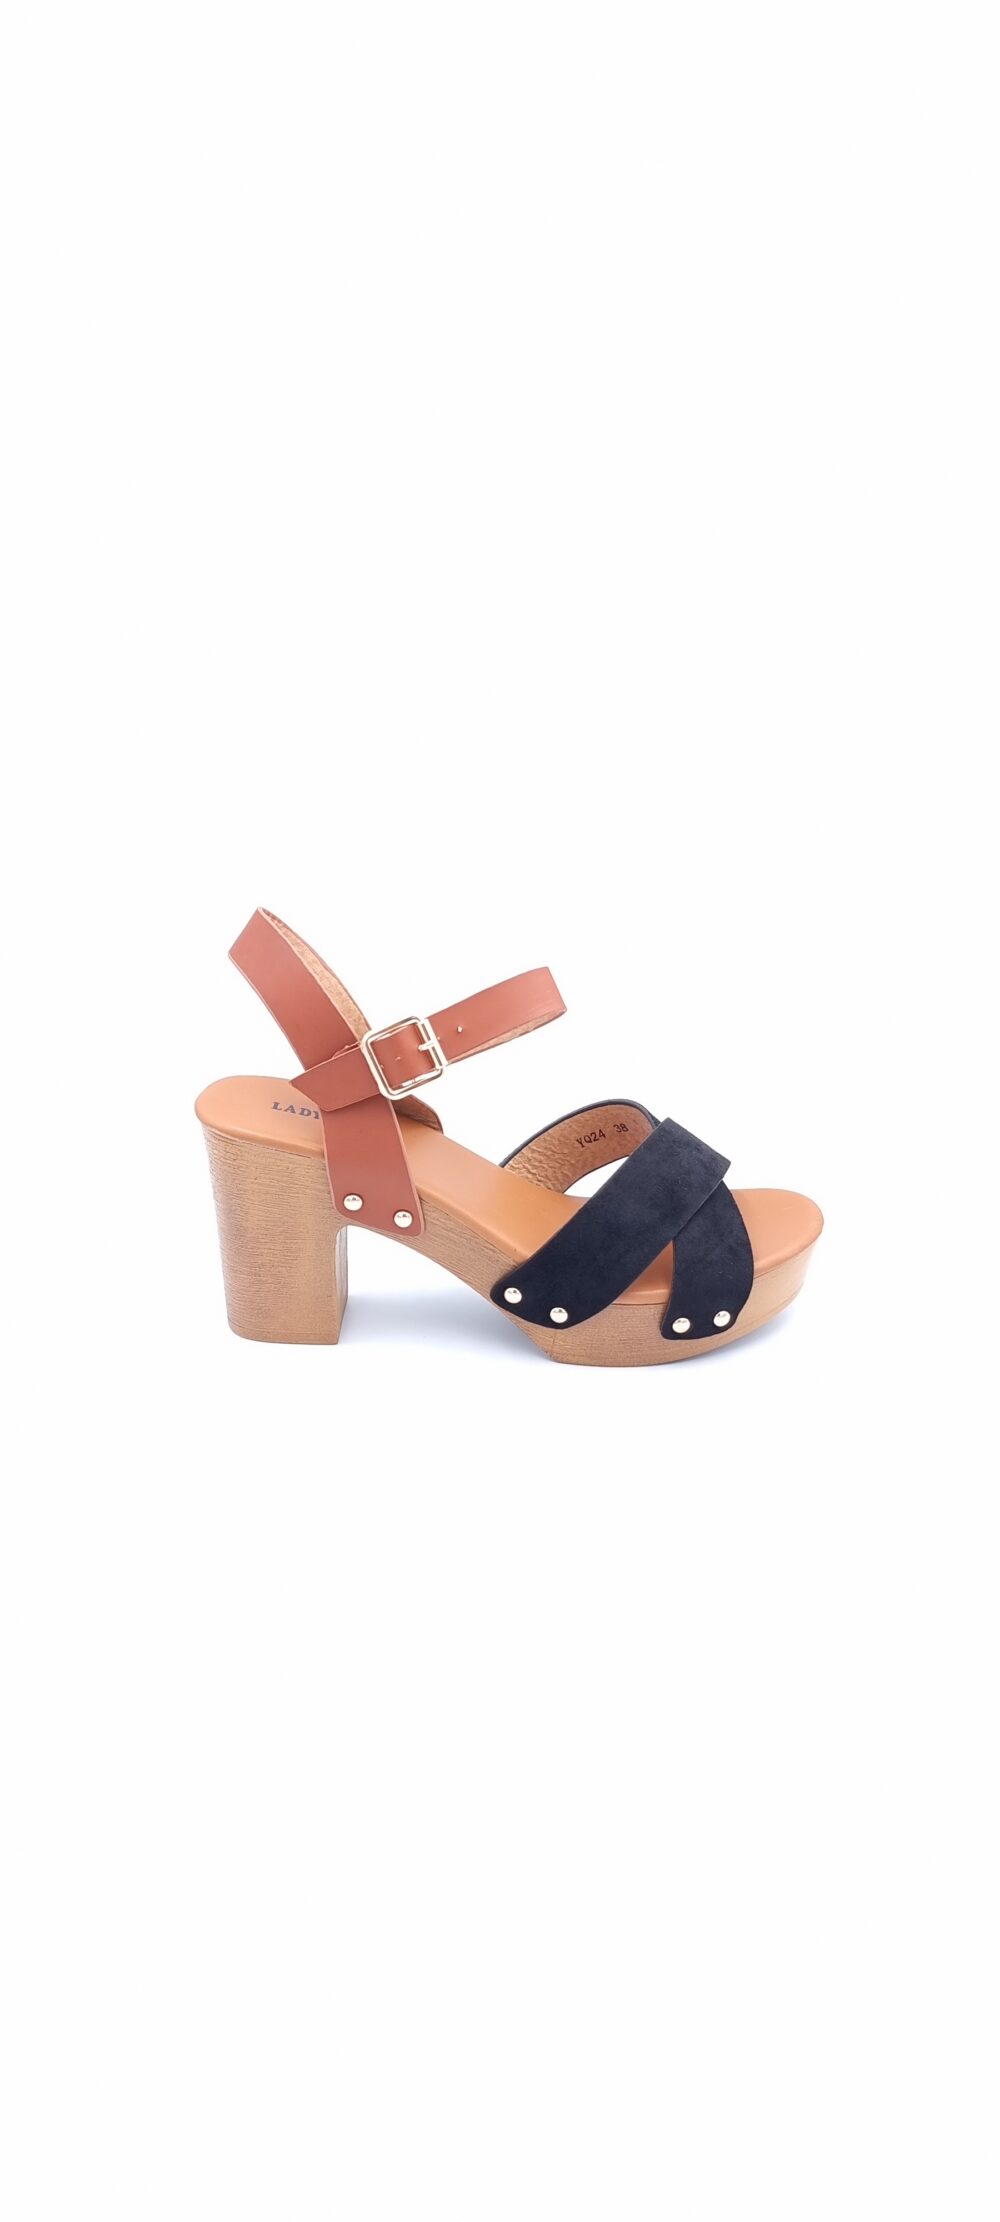 Sandal with wooden heel and cross pattern black